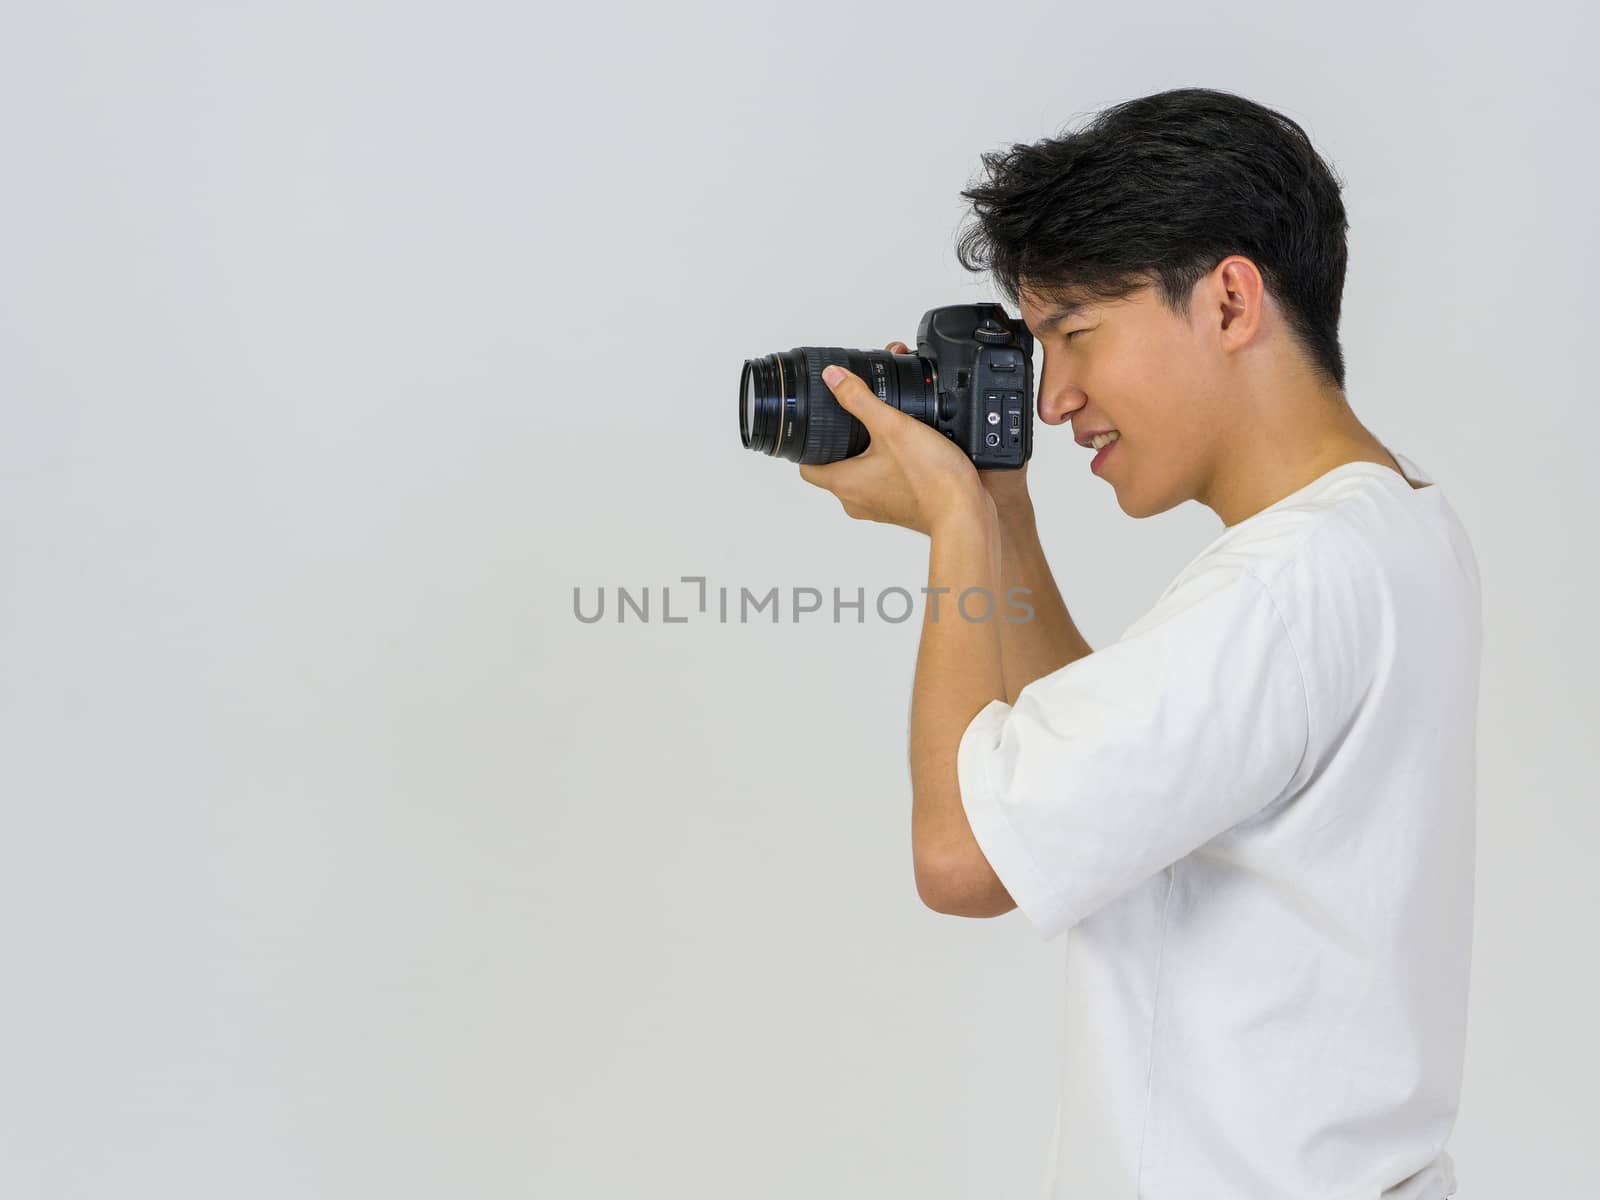 The photographer looks through the viewfinder while shooting with the camera. Working atmosphere in the photo studio.